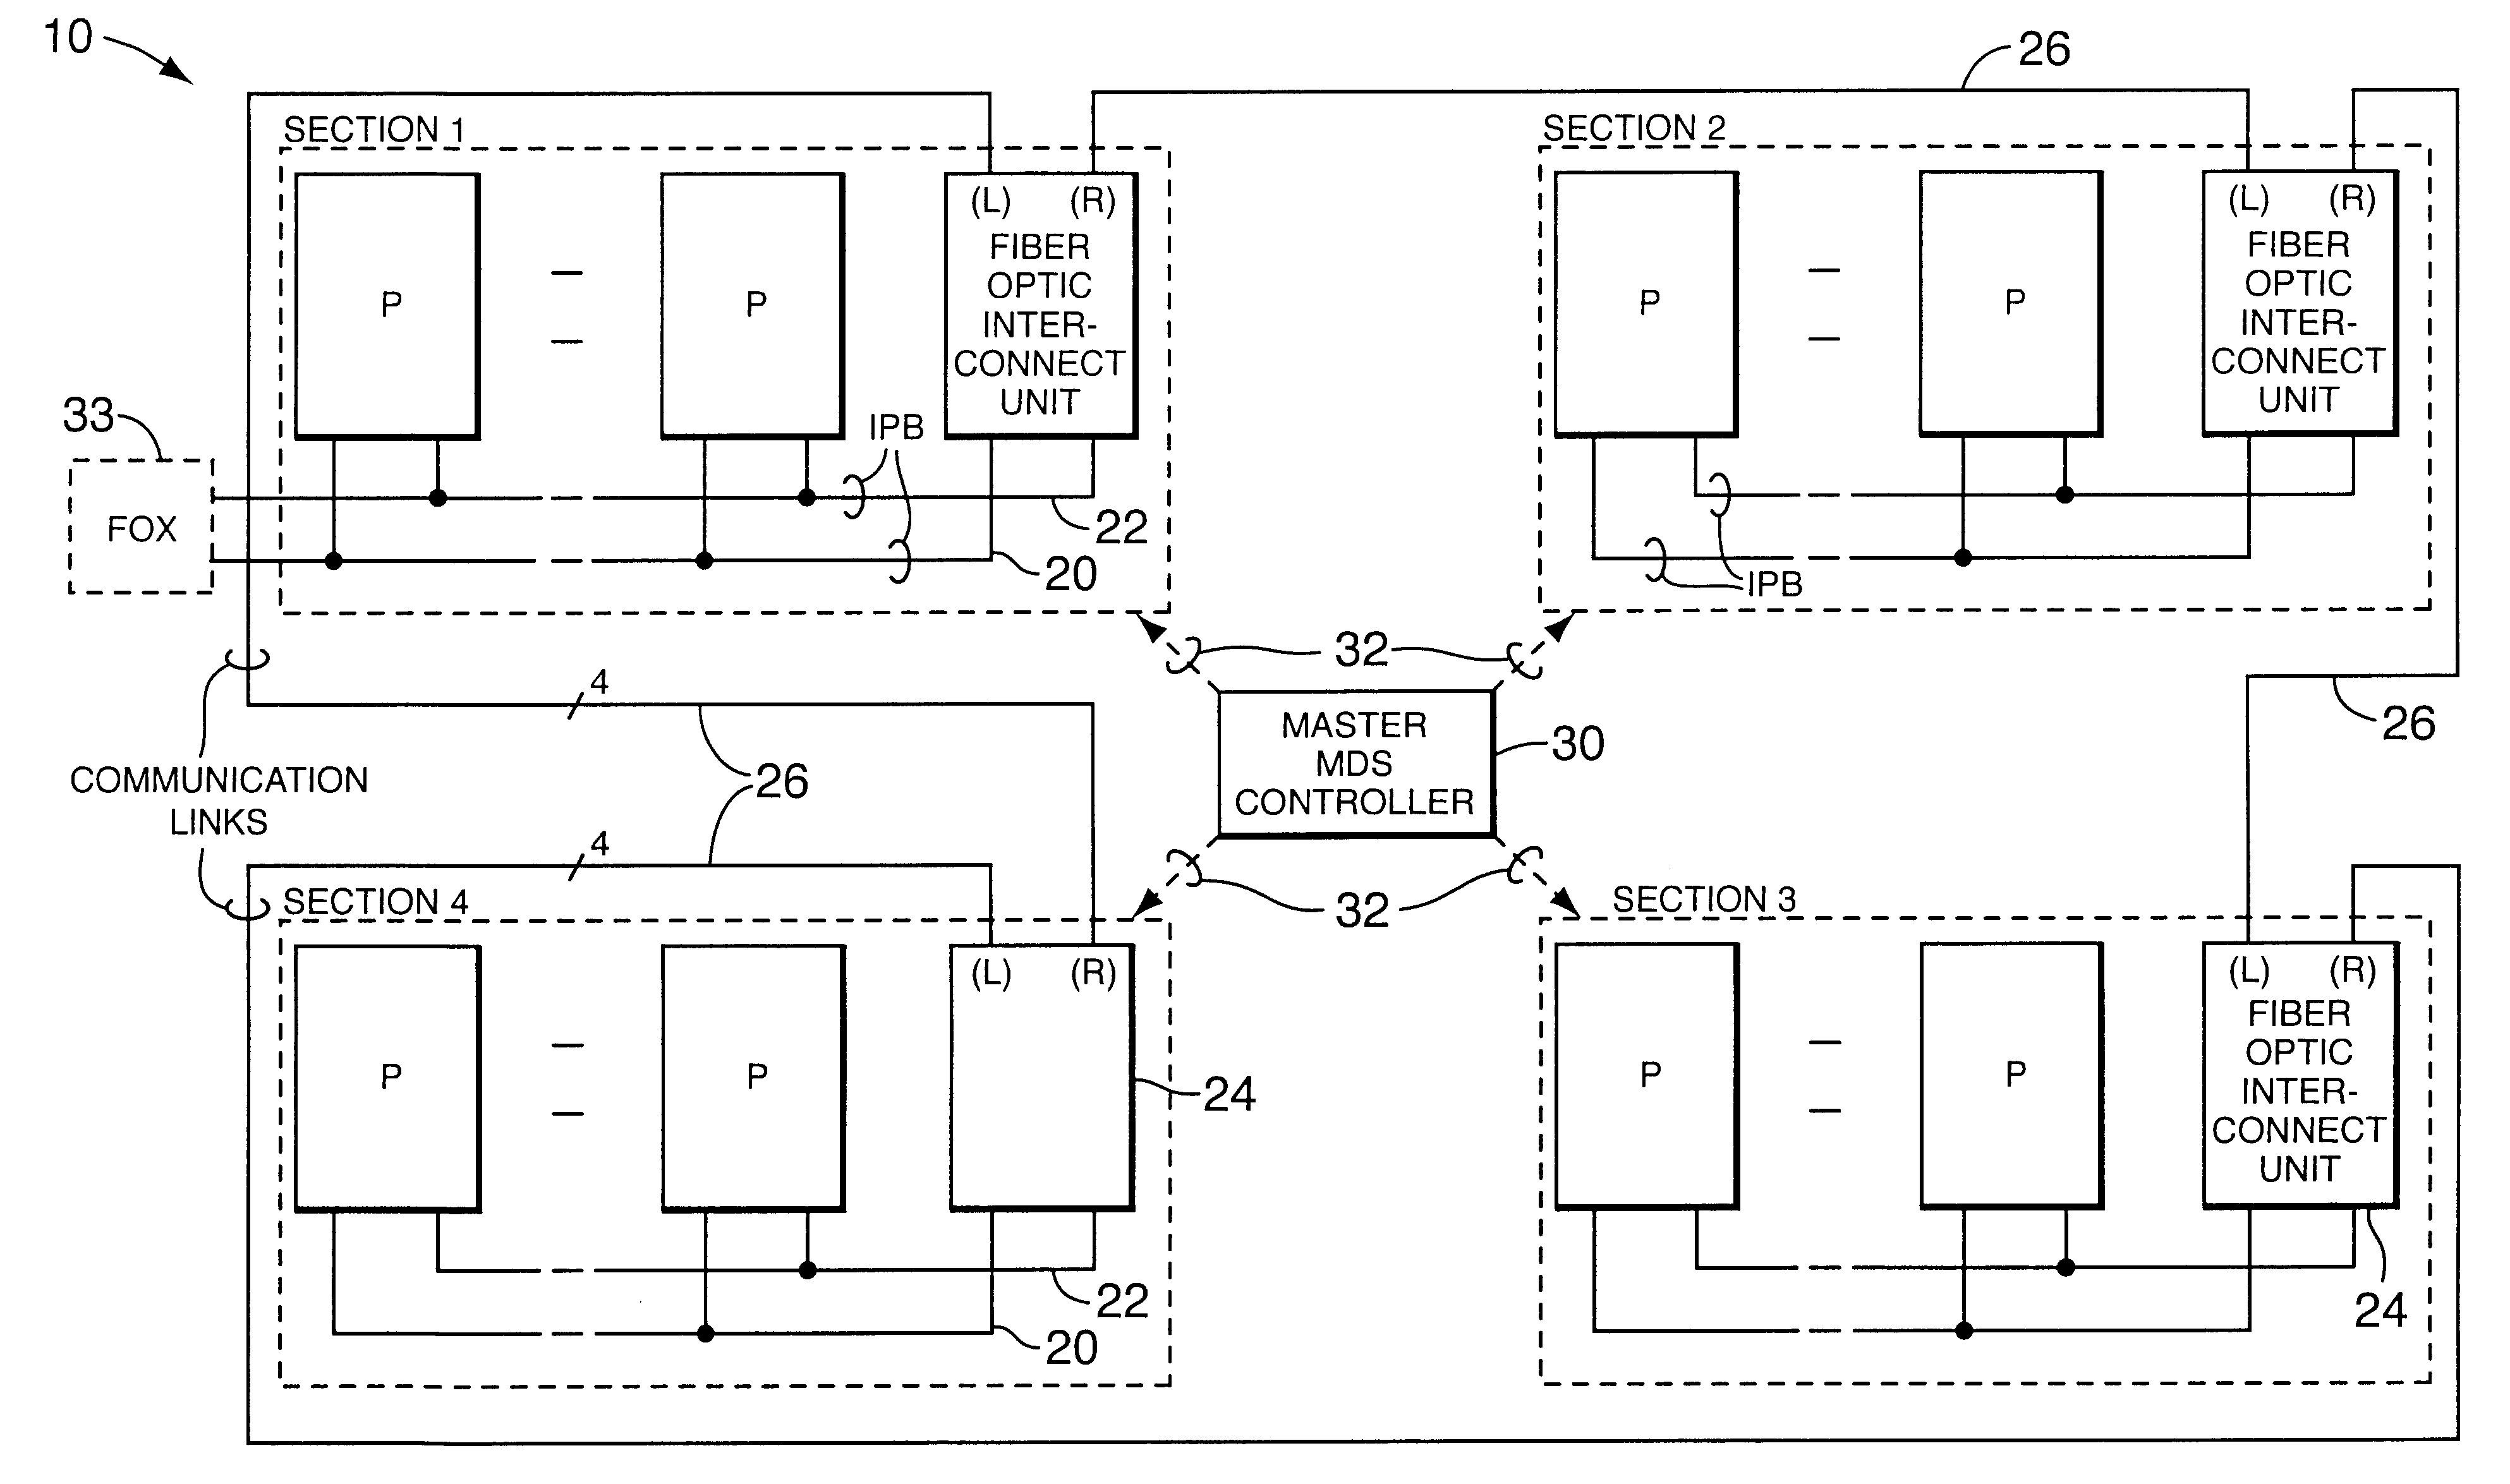 Multiprocessor system with fiber optic bus interconnect for interprocessor communications